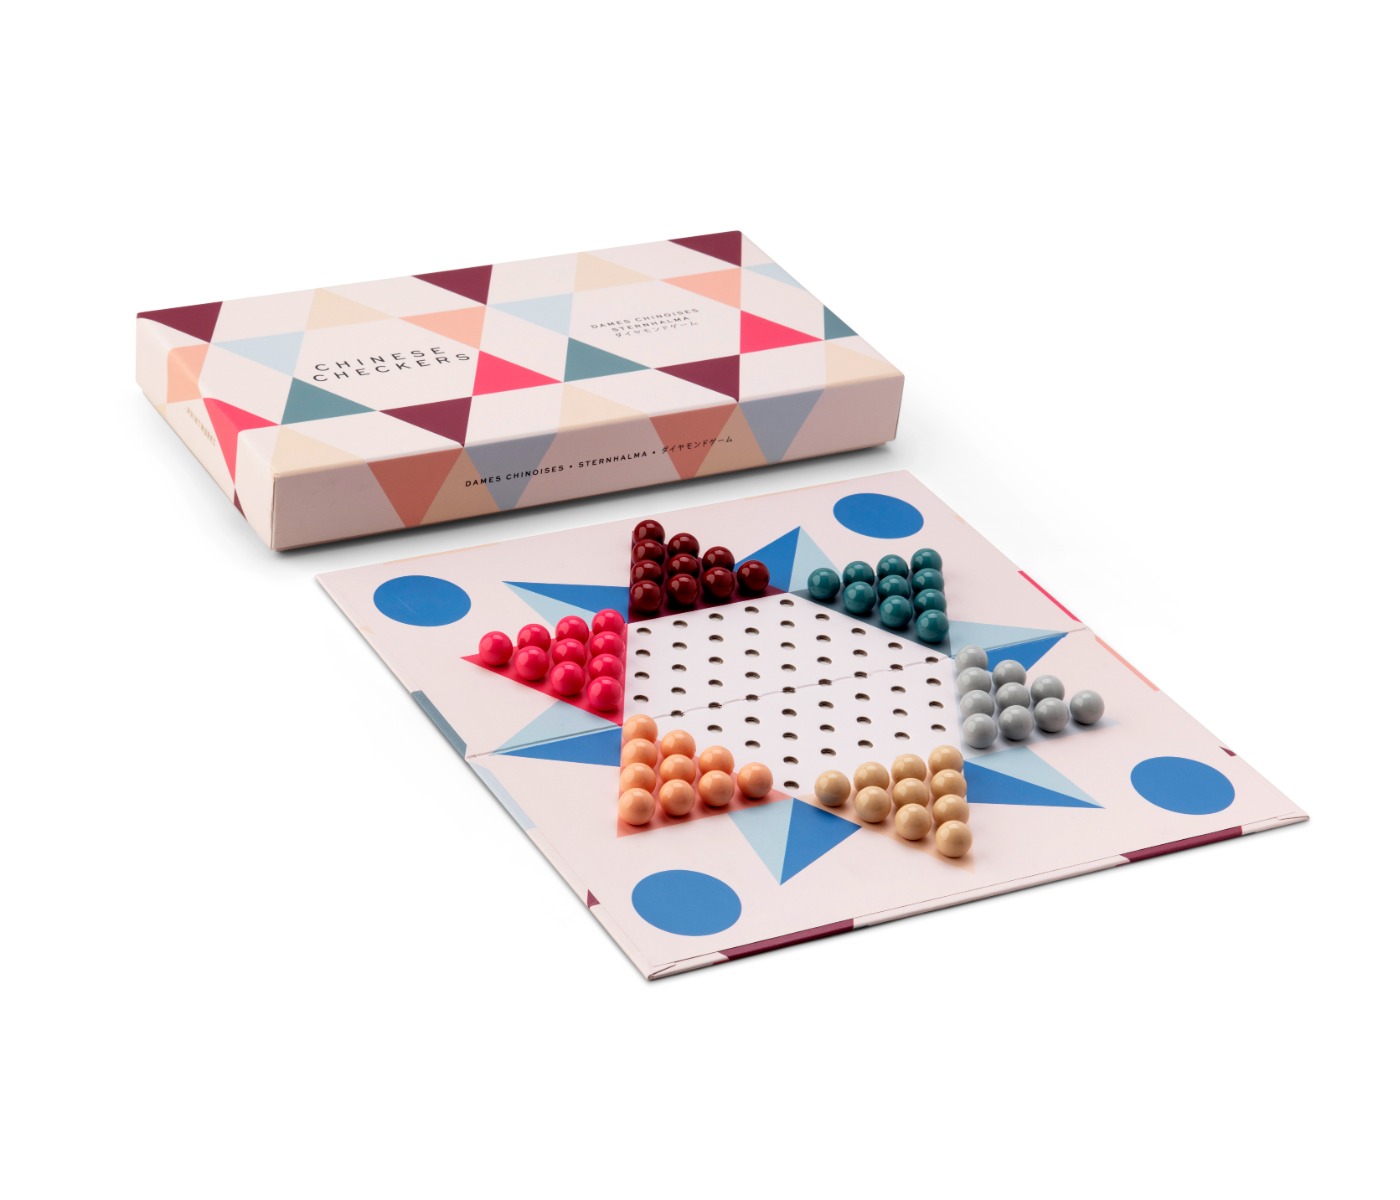 Chinese Checkers - New Play Image 1